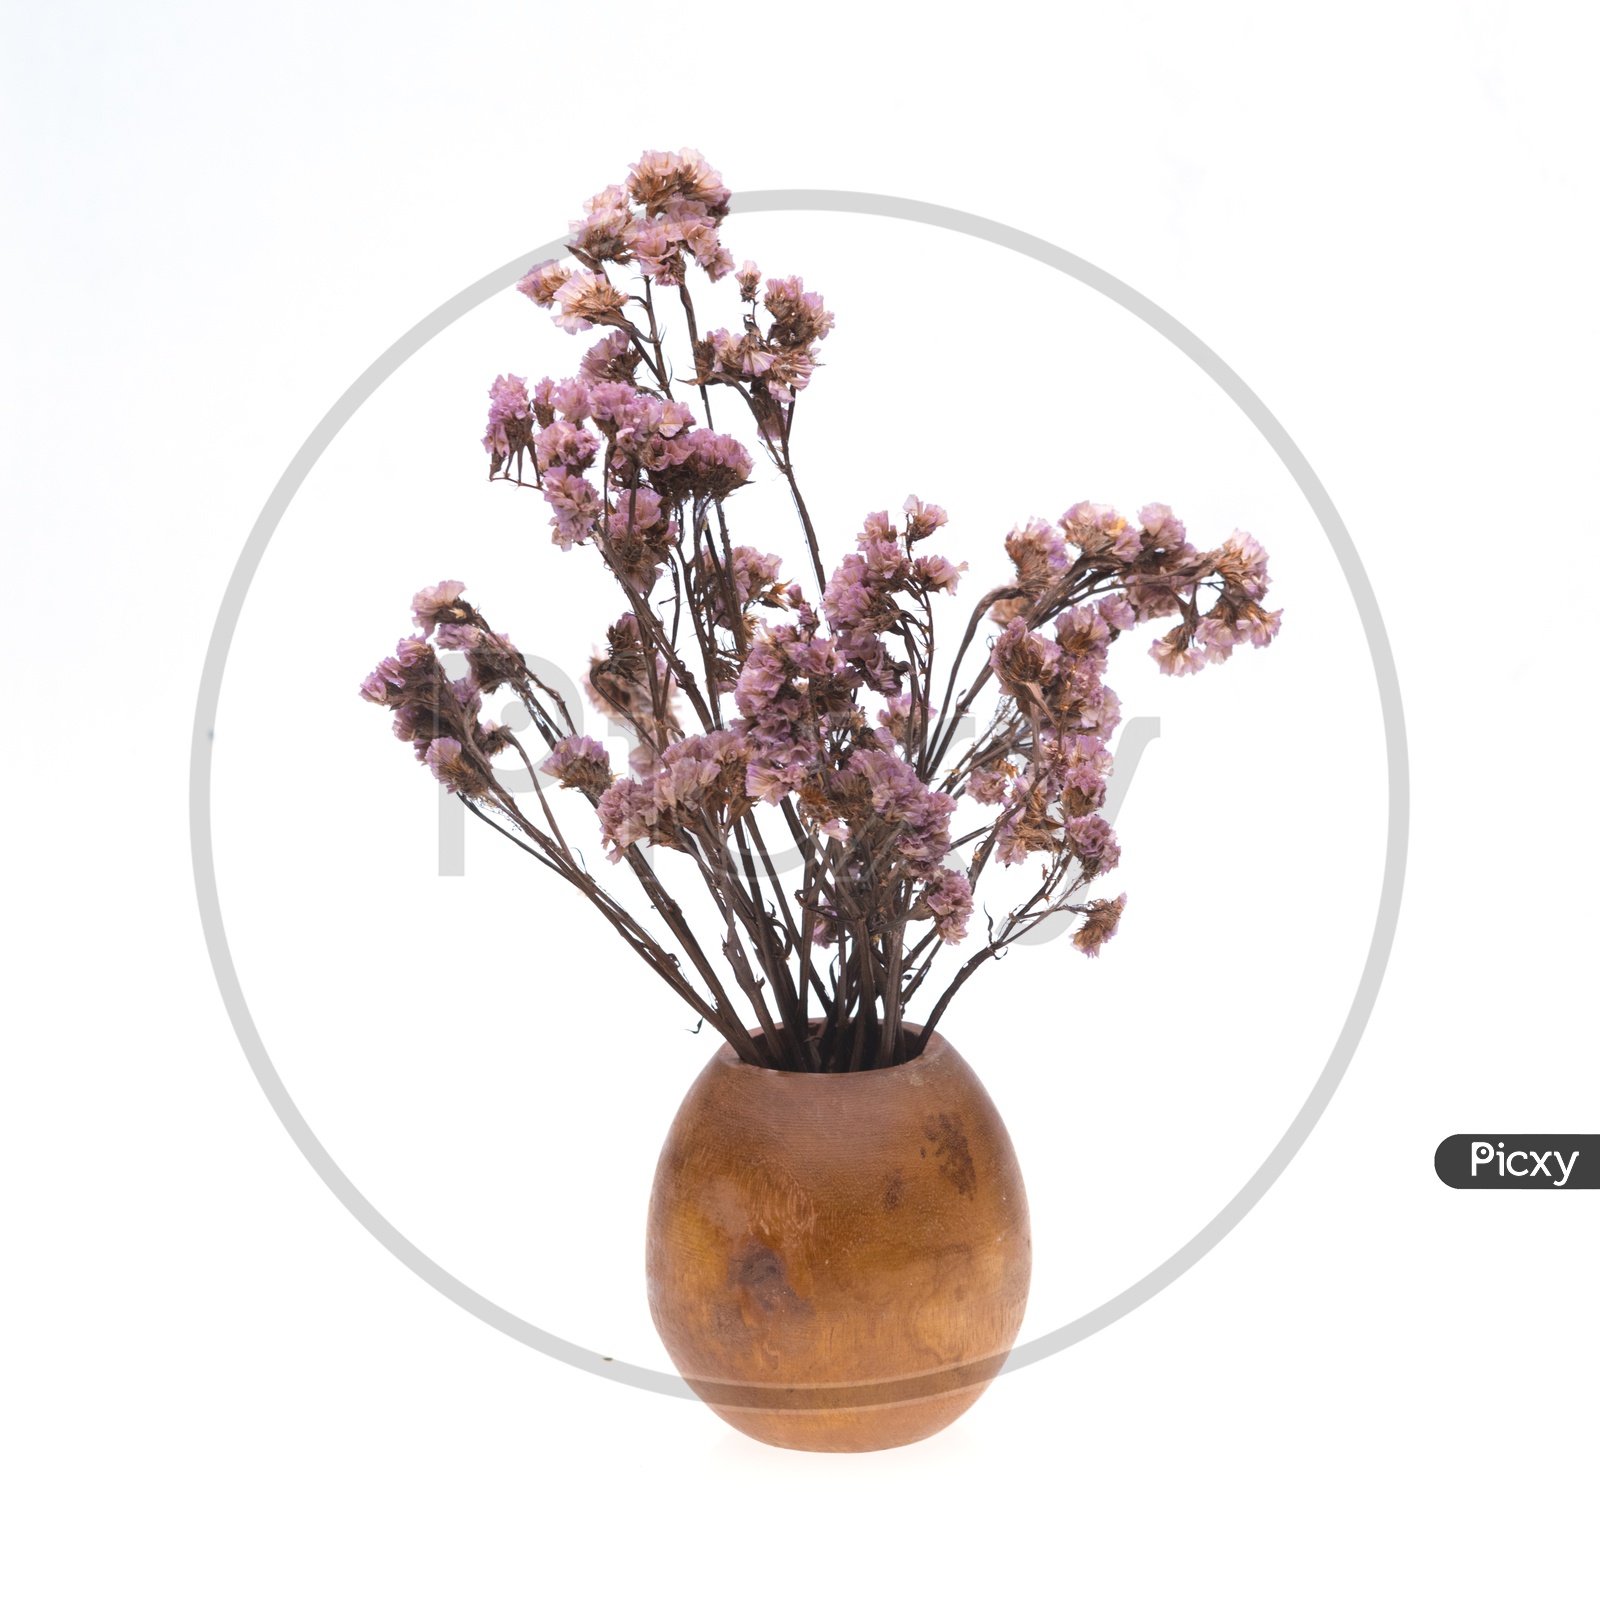 Dried pink flowers in a wooden vase isolated on white background